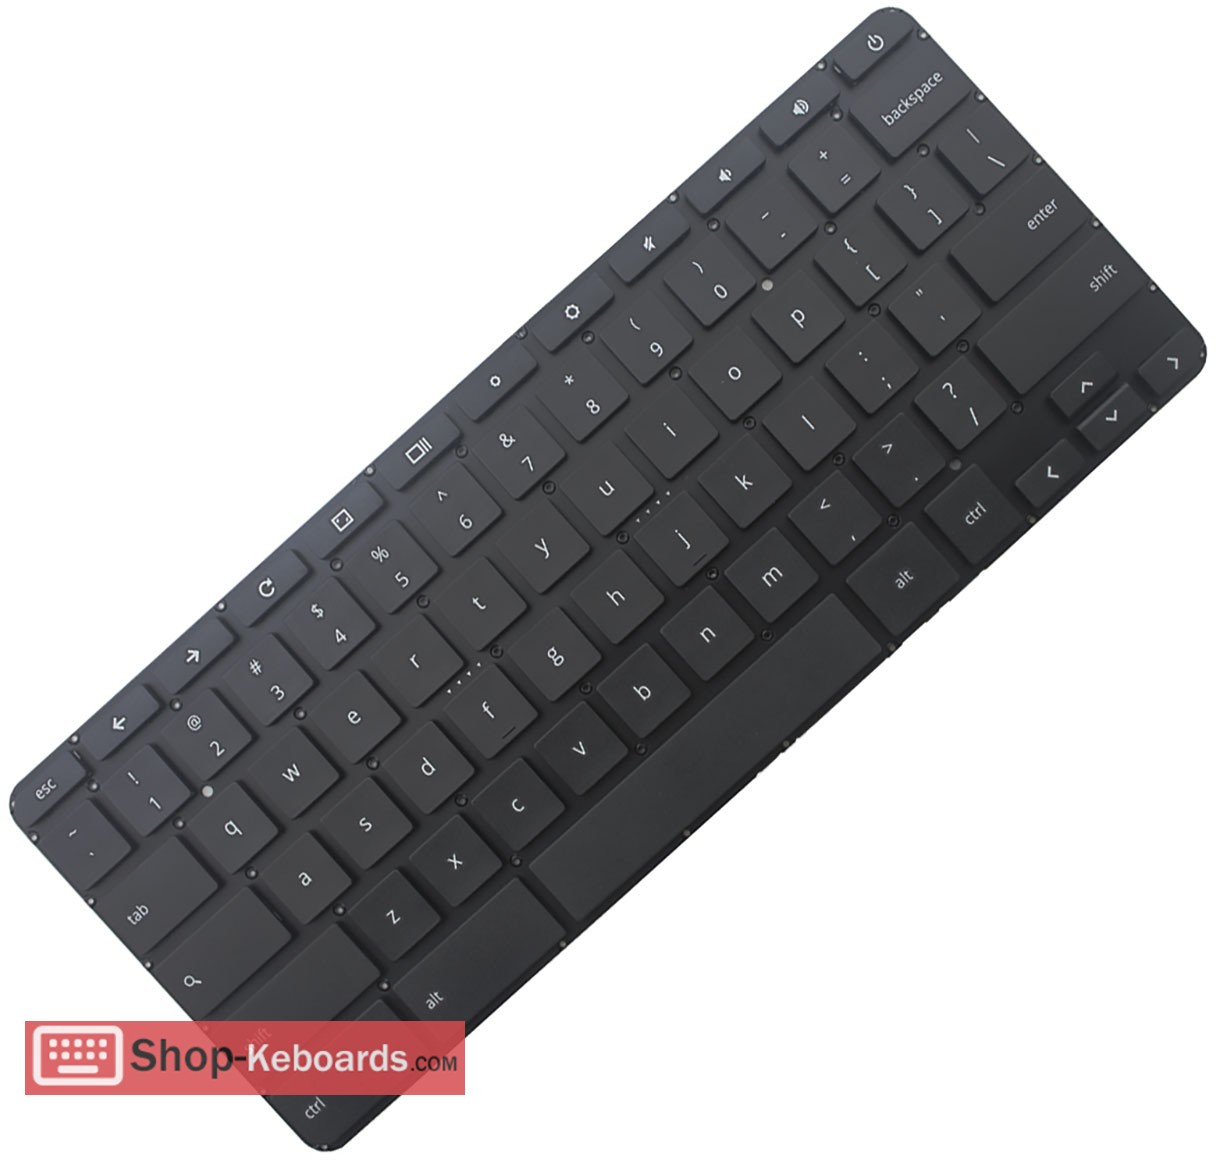 HP CHROMEBOOK 11 G4 EE Keyboard replacement